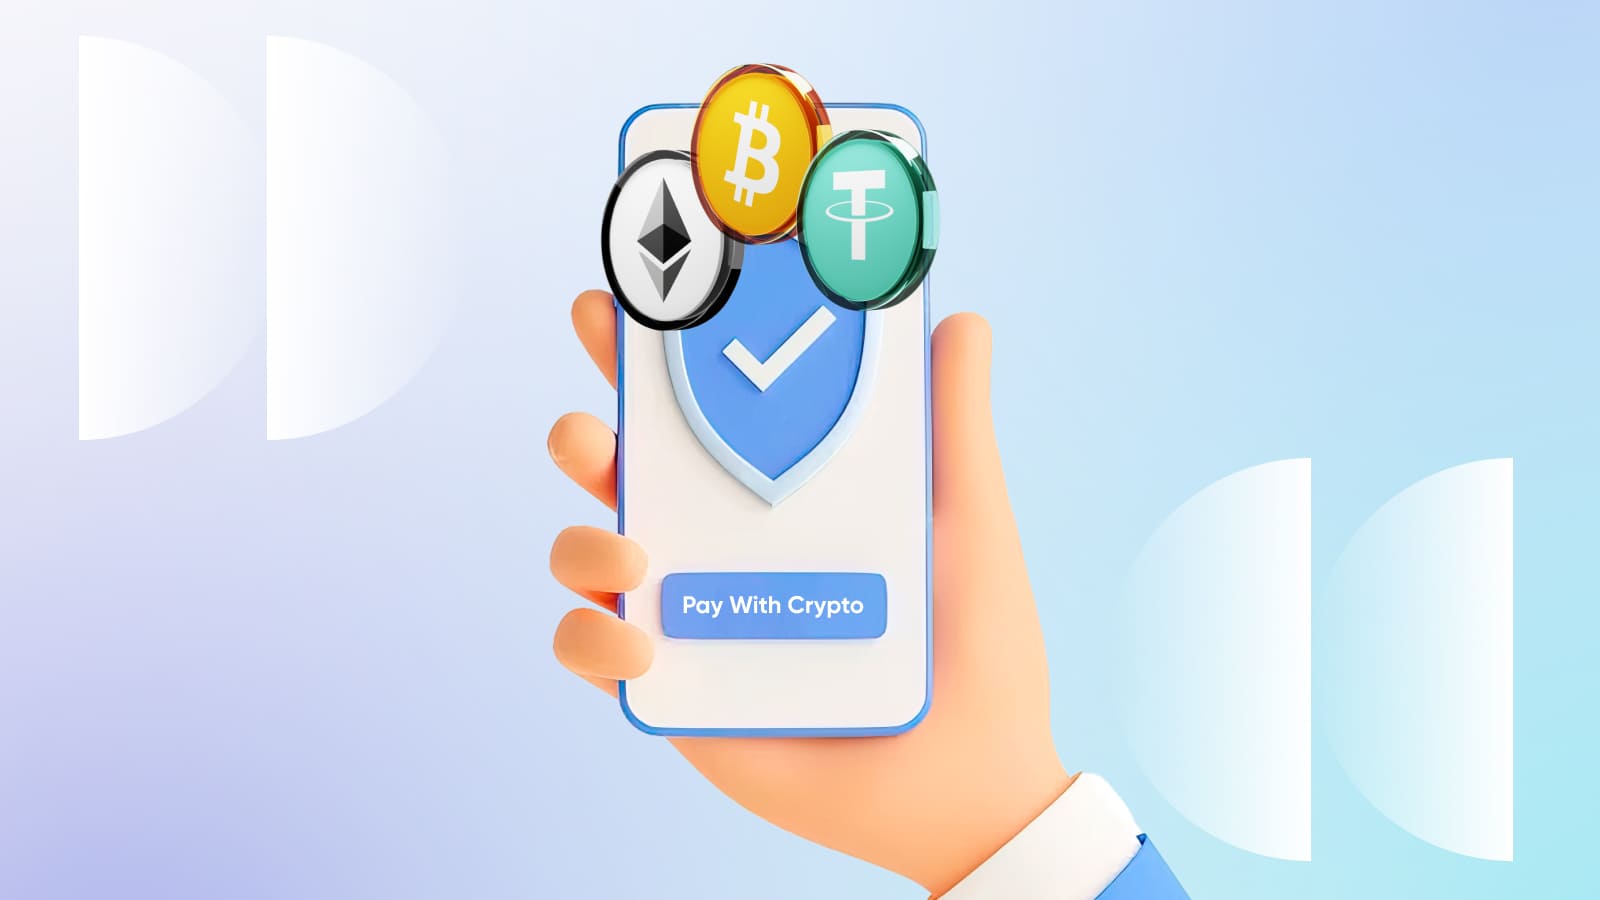 Crypto acquiring CryptoCloud allows merchants to accept payments from all over the world.